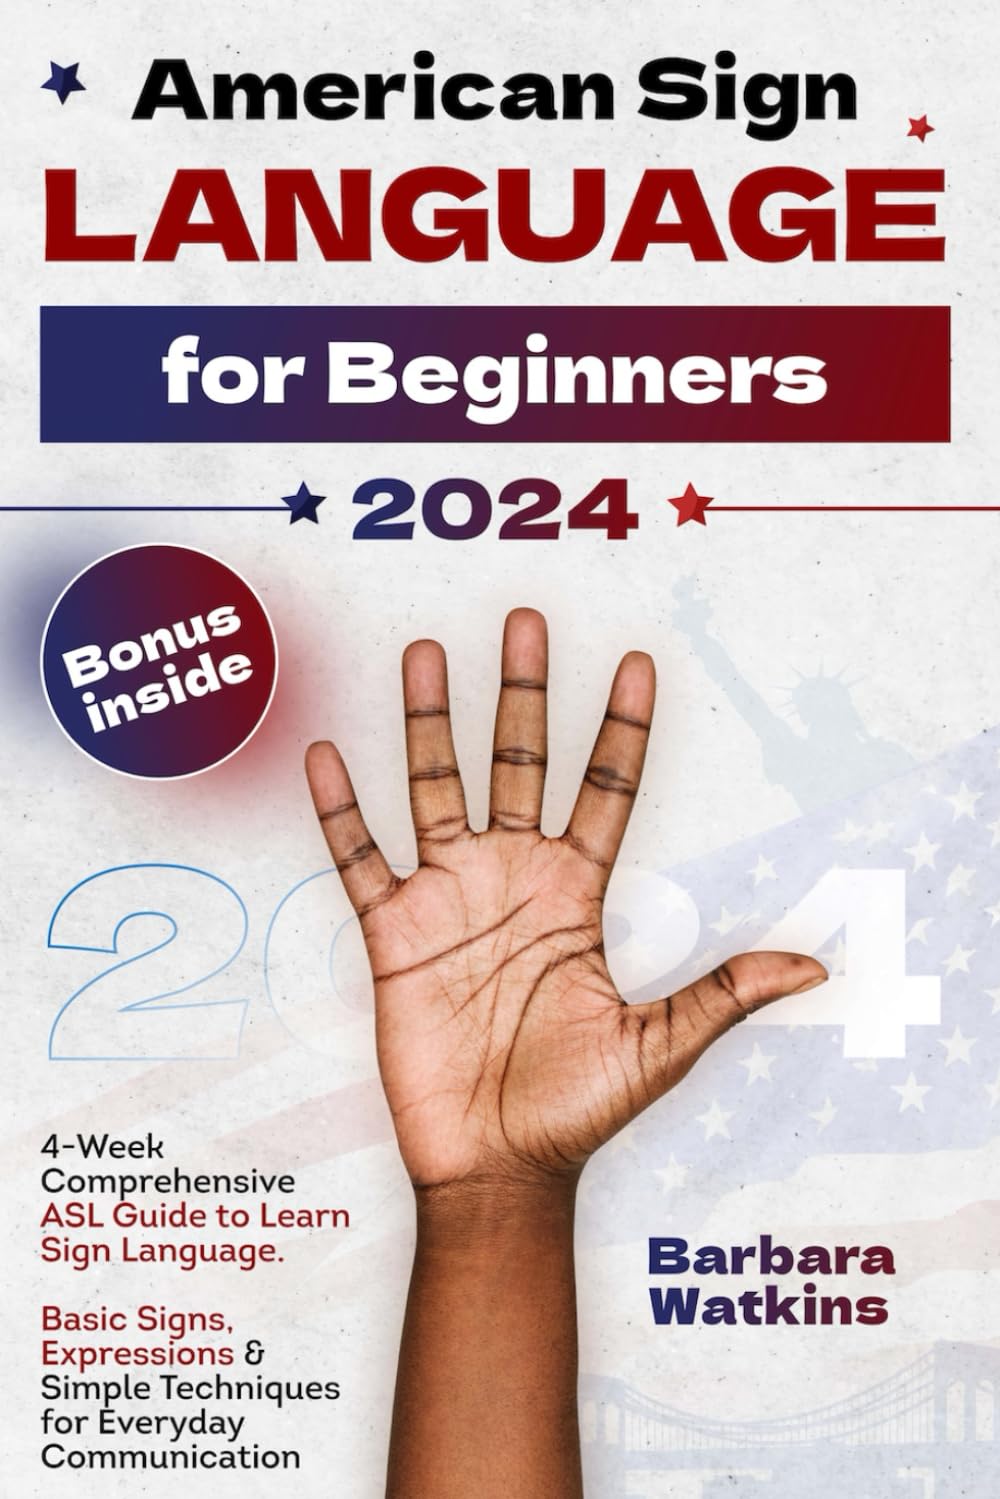 American Sign Language for Beginners: 4-Week Comprehensive ASL Guide to Learn Sign Language. Basic Signs, Expressions & Simple Techniques for Everyday Communication